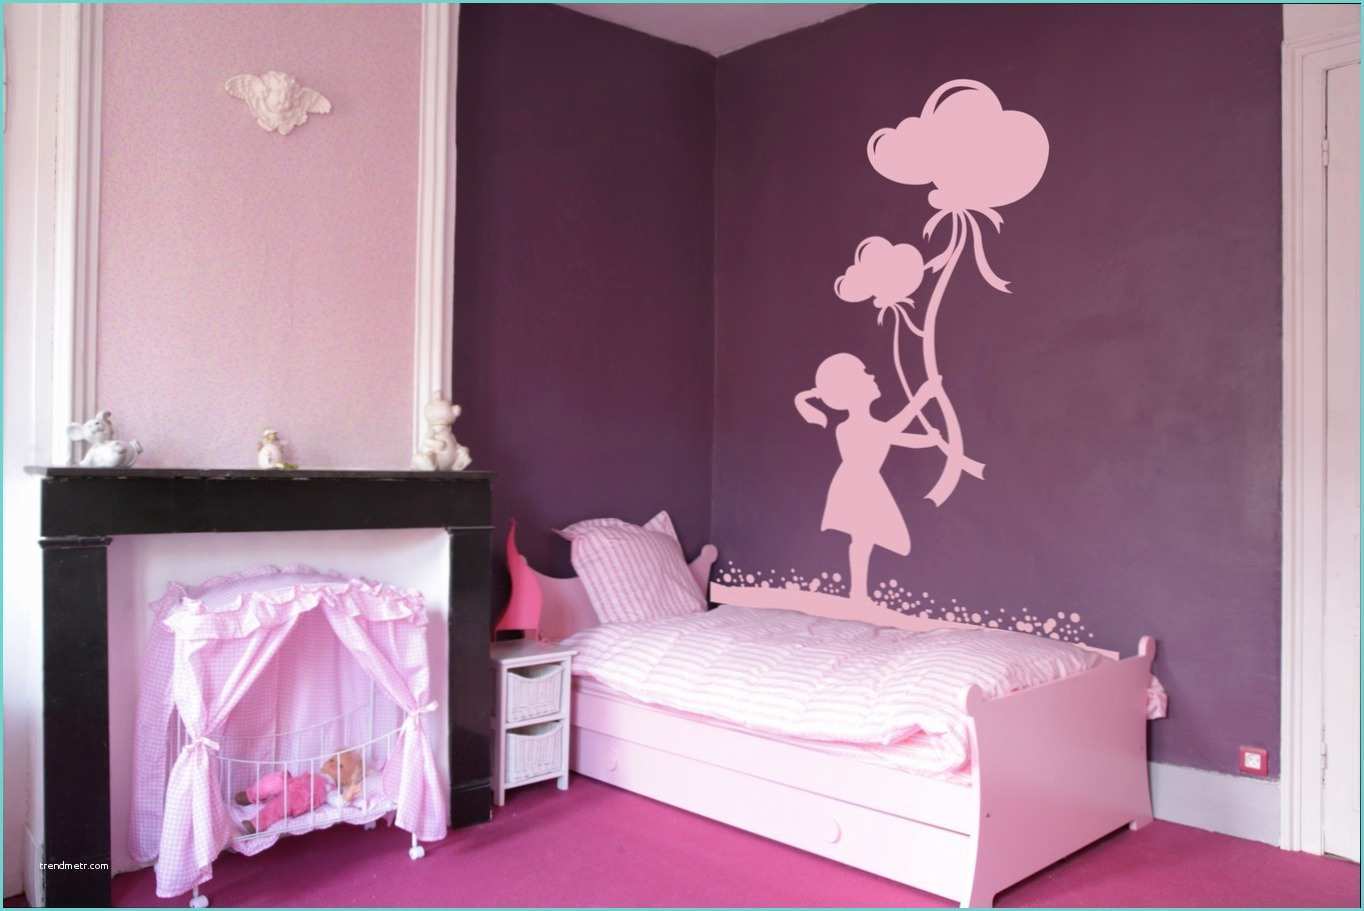 Deco Chambre Fille 10 Ans Awesome Chambre Fille Ans Ikea with Chambre Fille 10 Ans